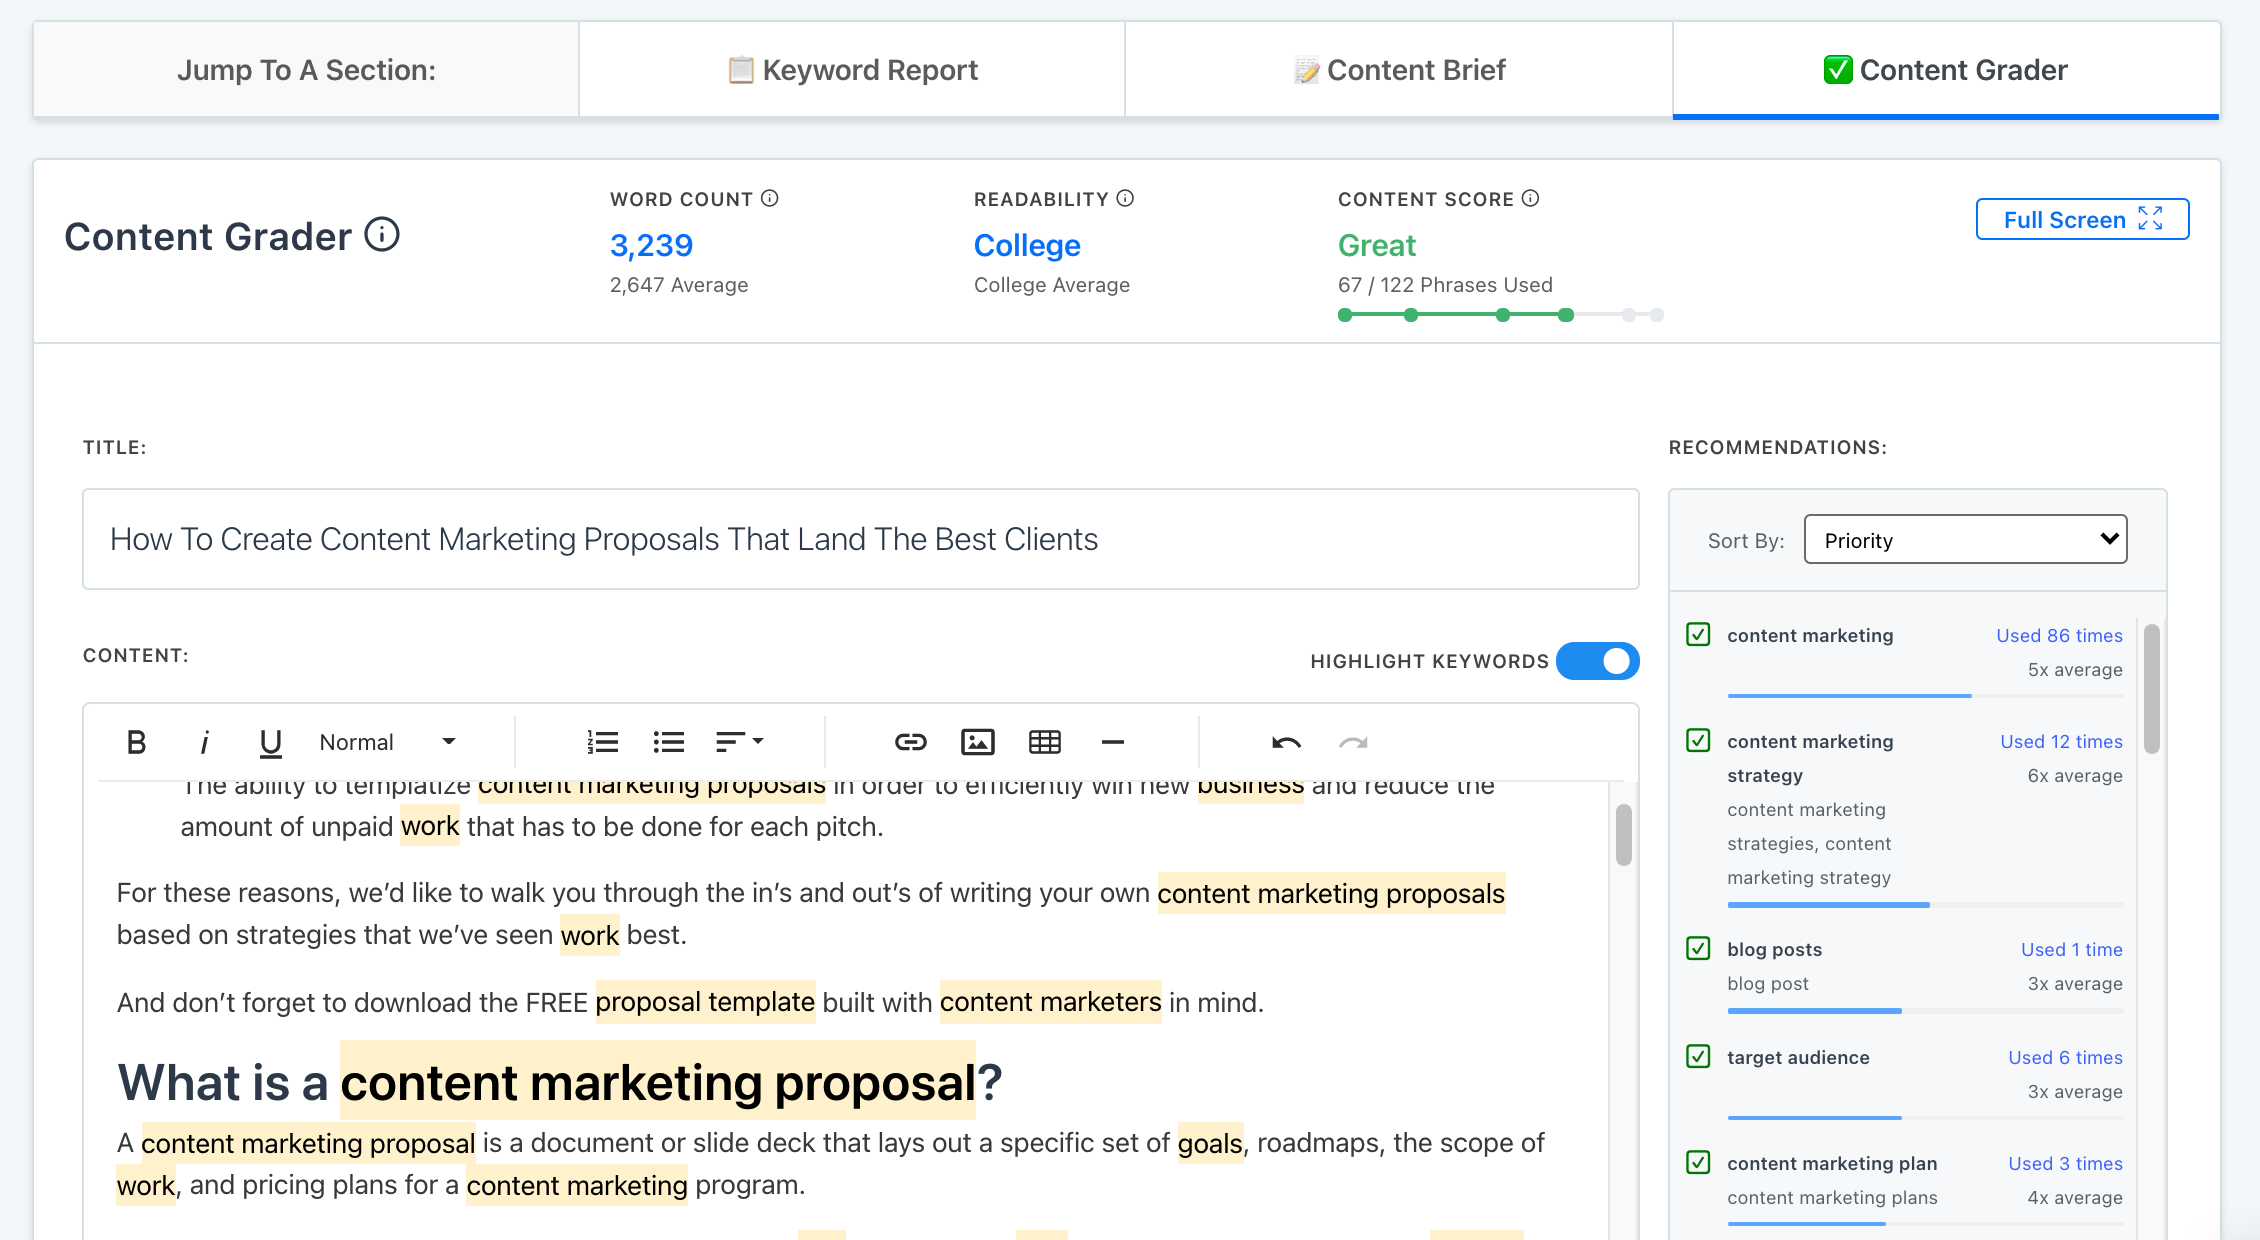 How To Create Content Marketing Proposals That Land The Best Clients